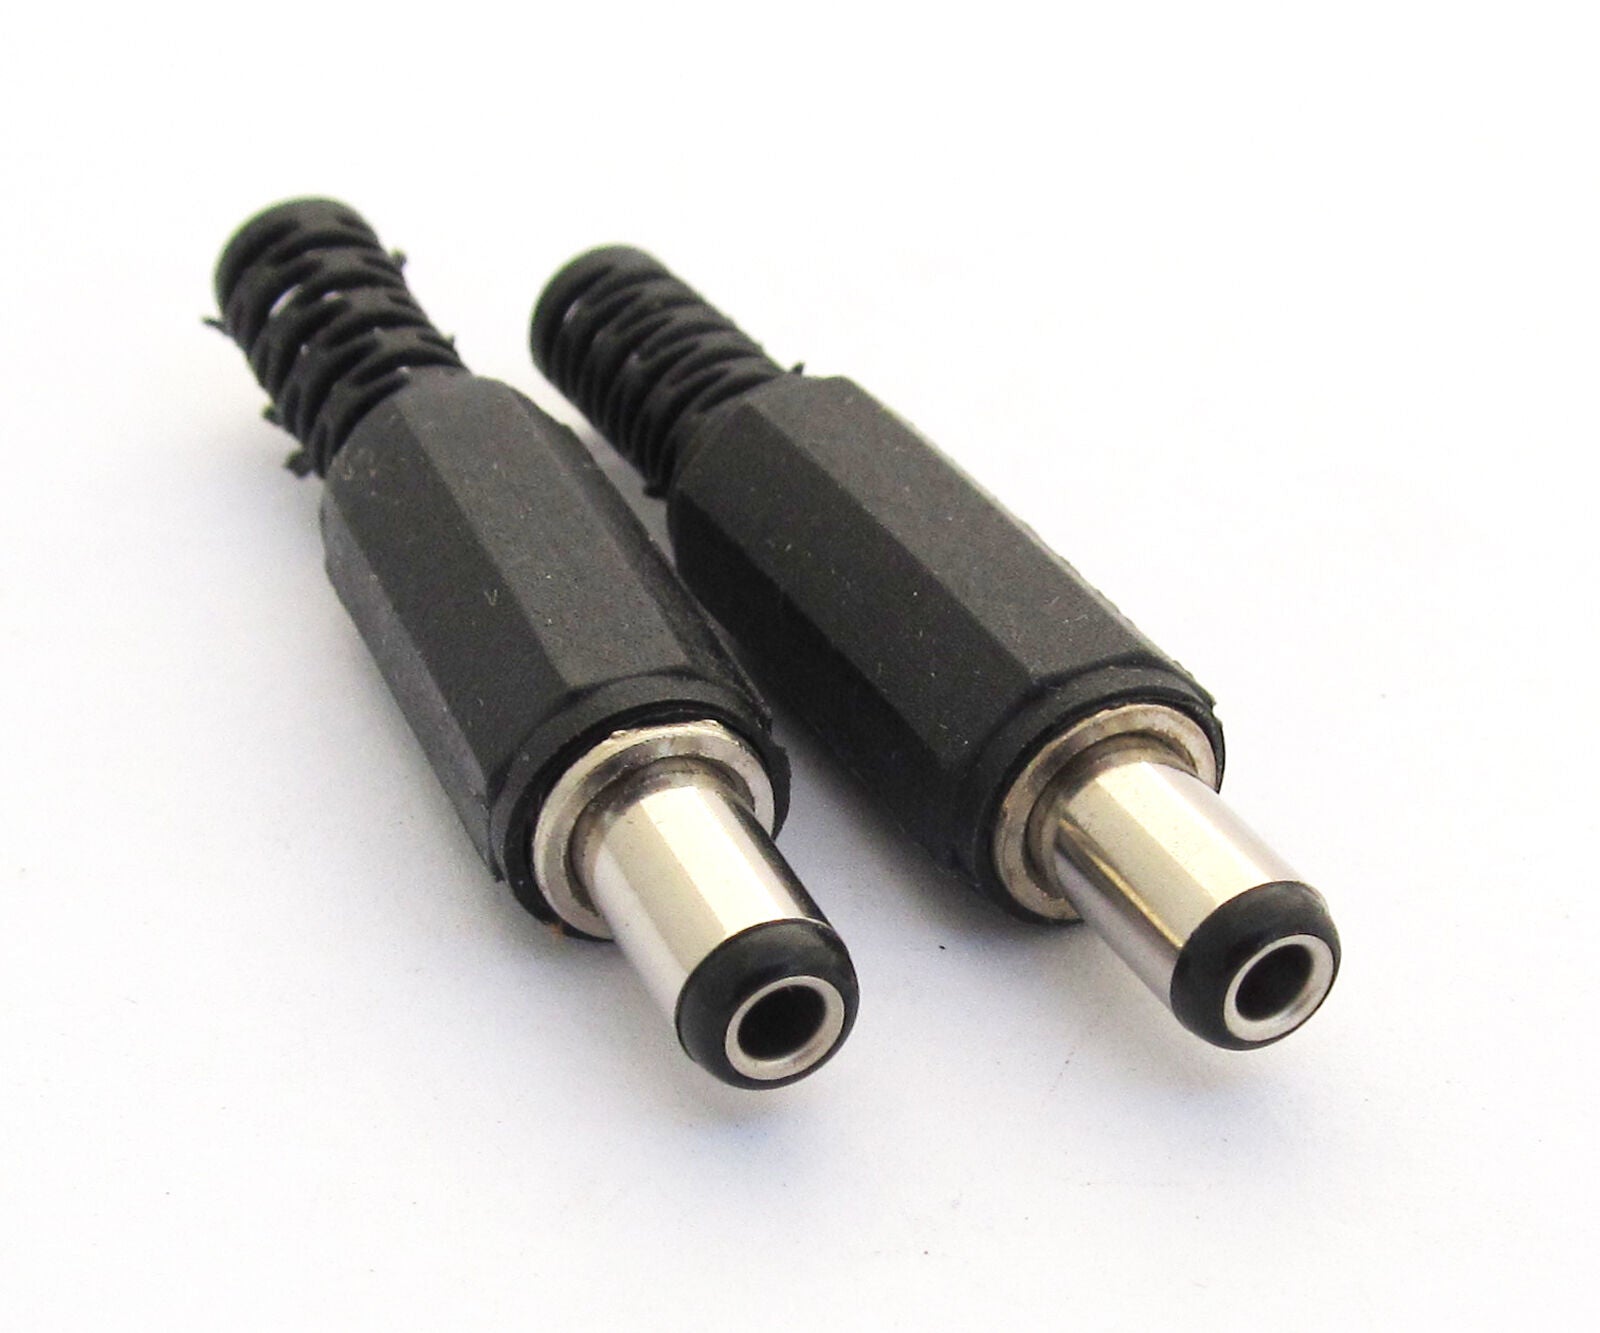 1pc 2.5x5.5mm 2.5mm DC Power Male Plug Soldering Connector Plastic Cover Black